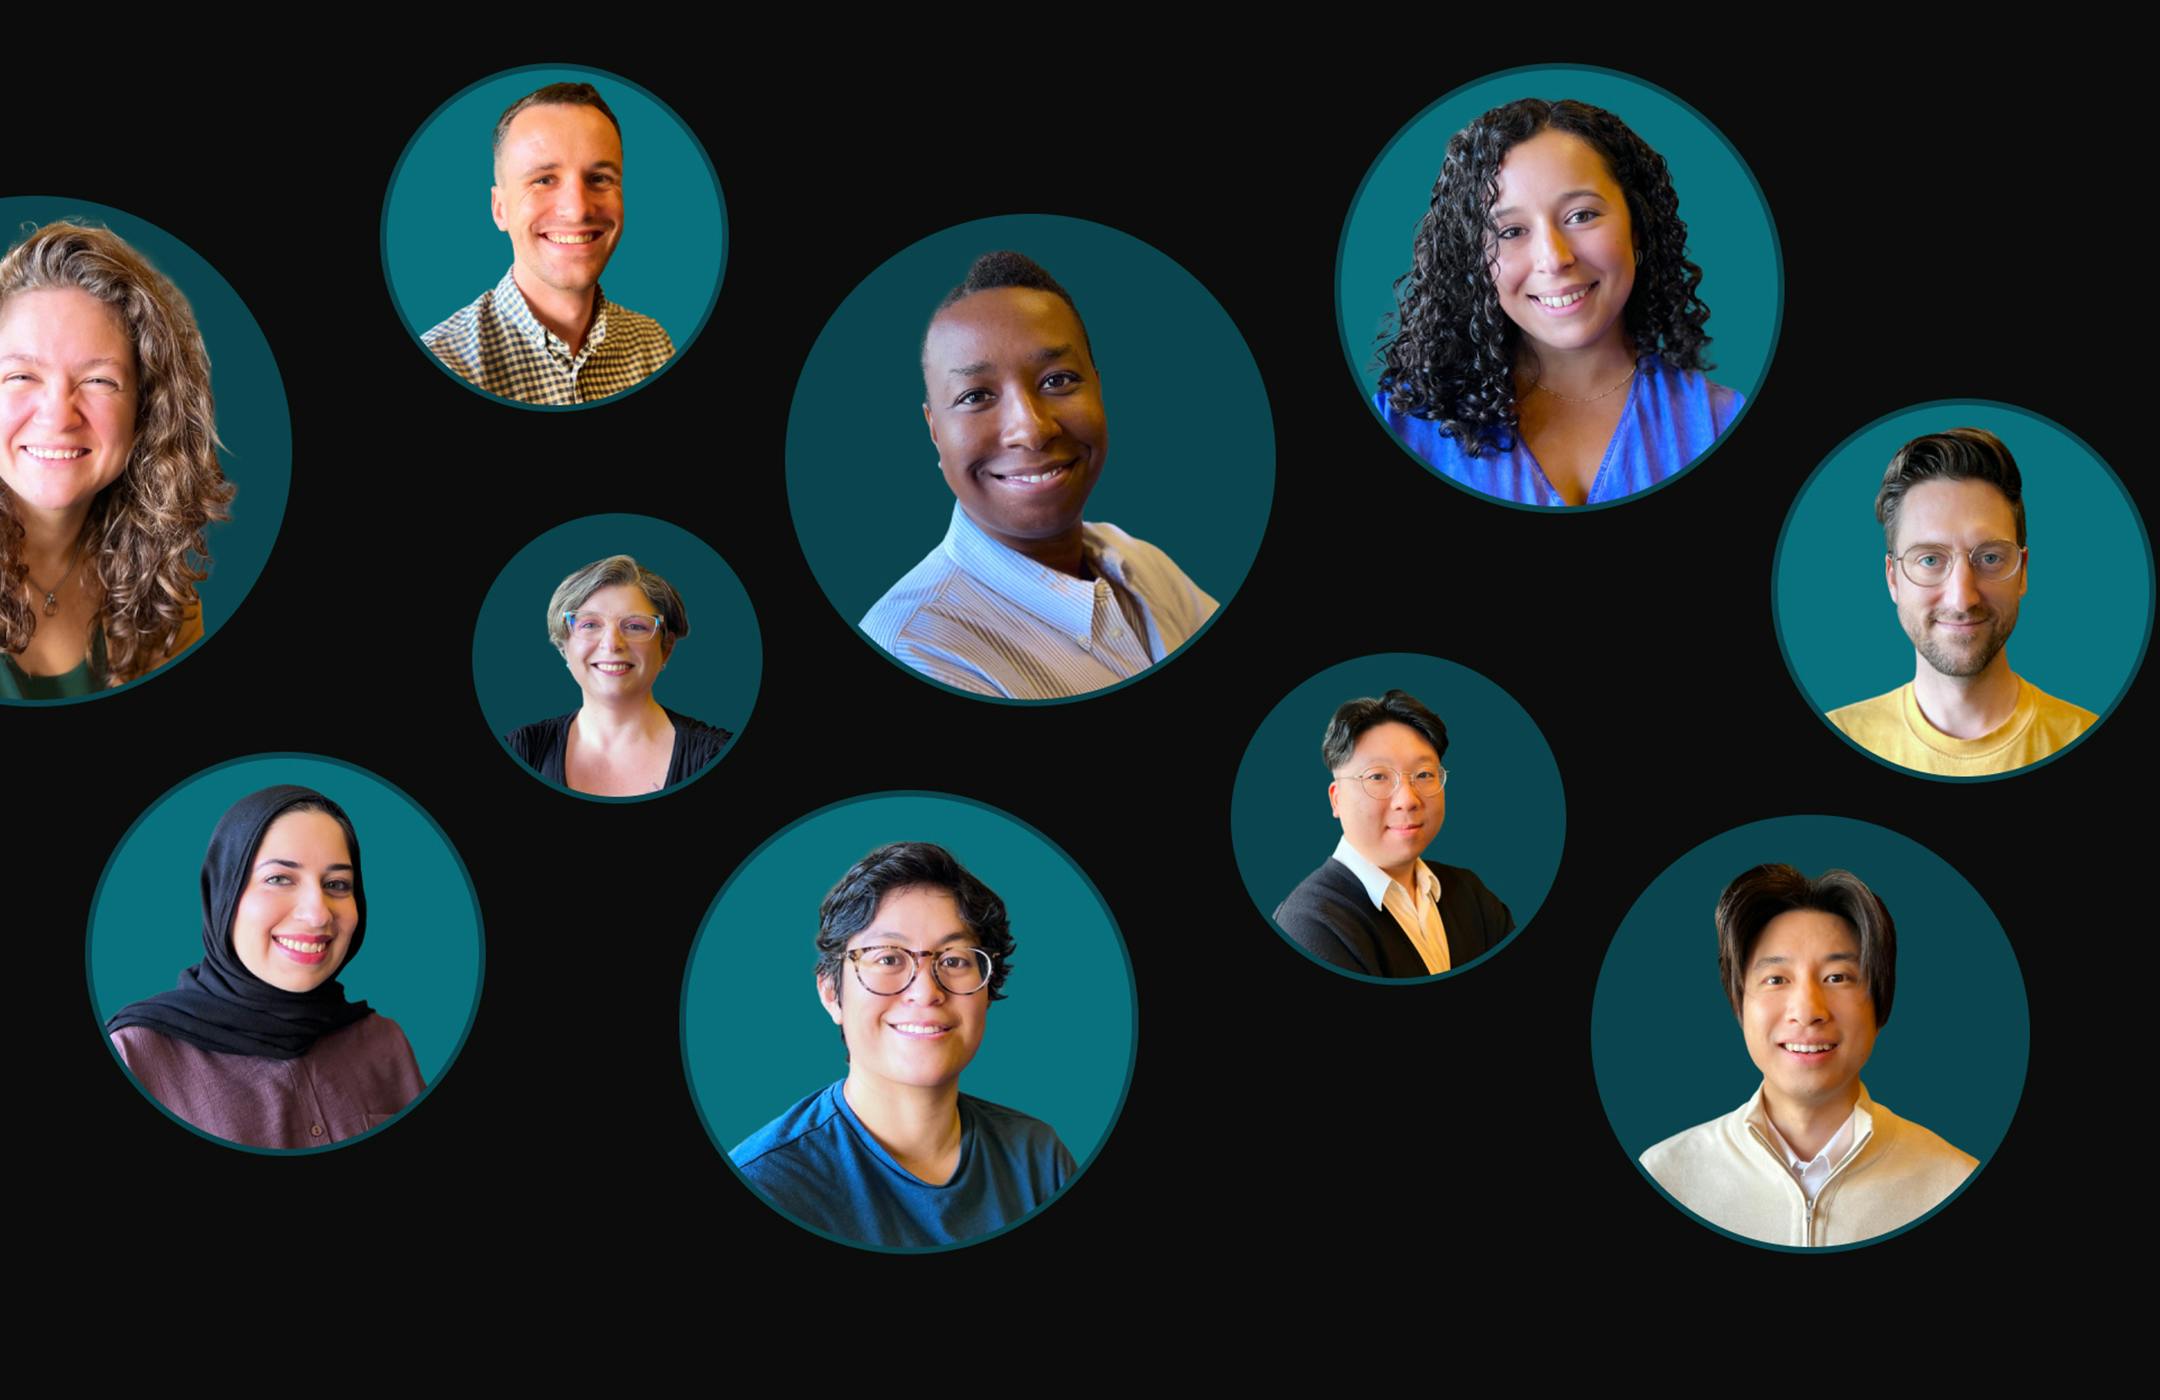 Collage of various Amperity employee profiles against teal circles.